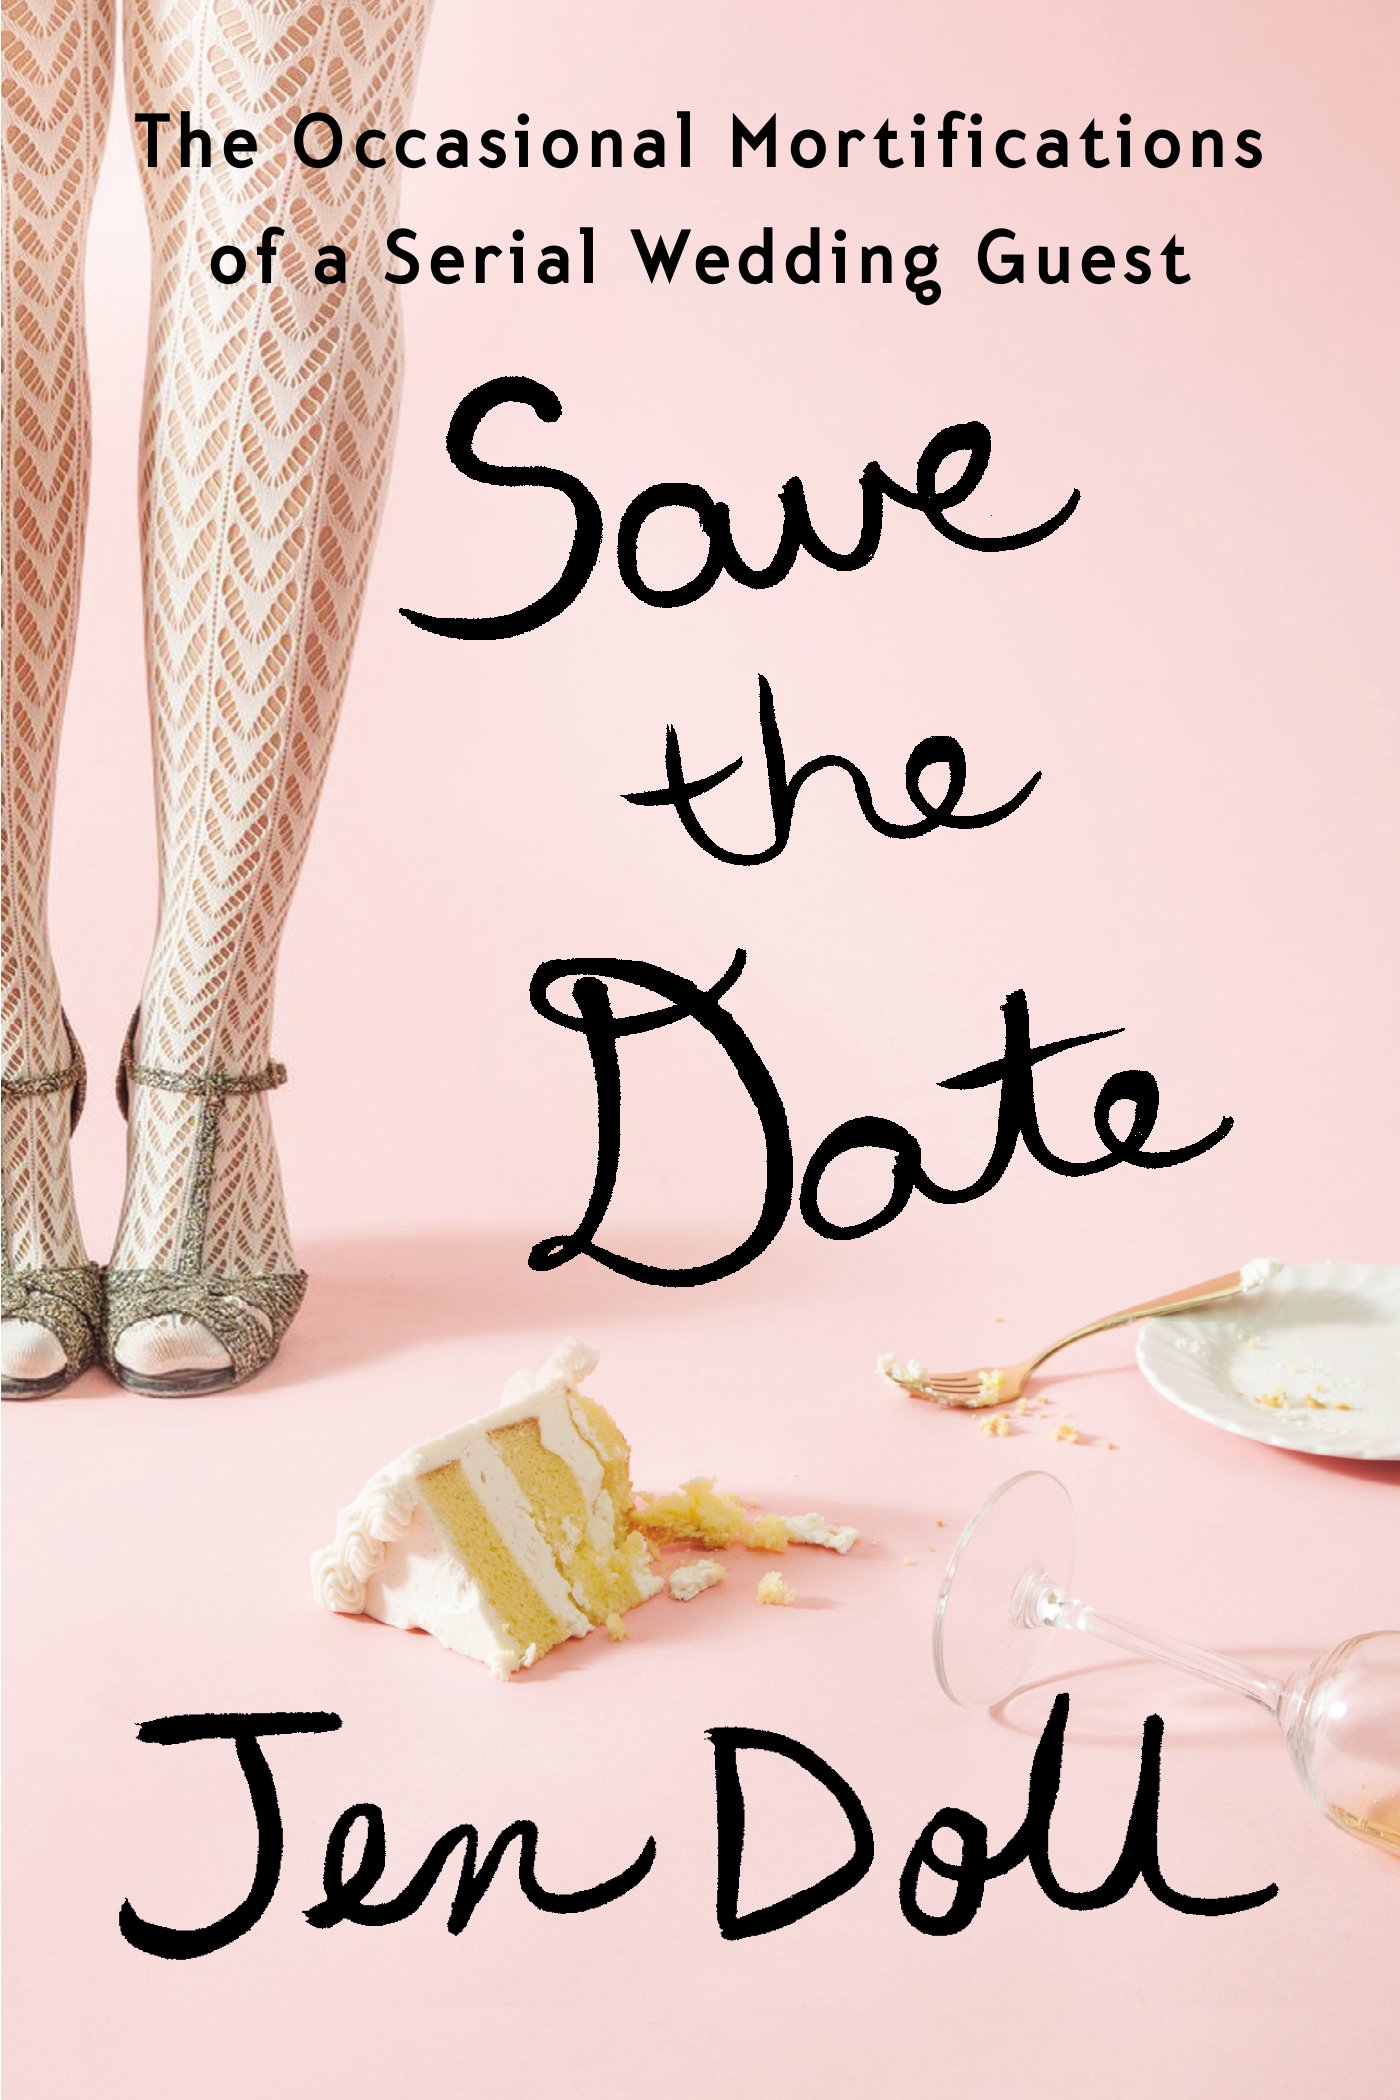 'Save the Date: The Occasional Mortifications of a Serial Wedding Guest' by Jen Doll